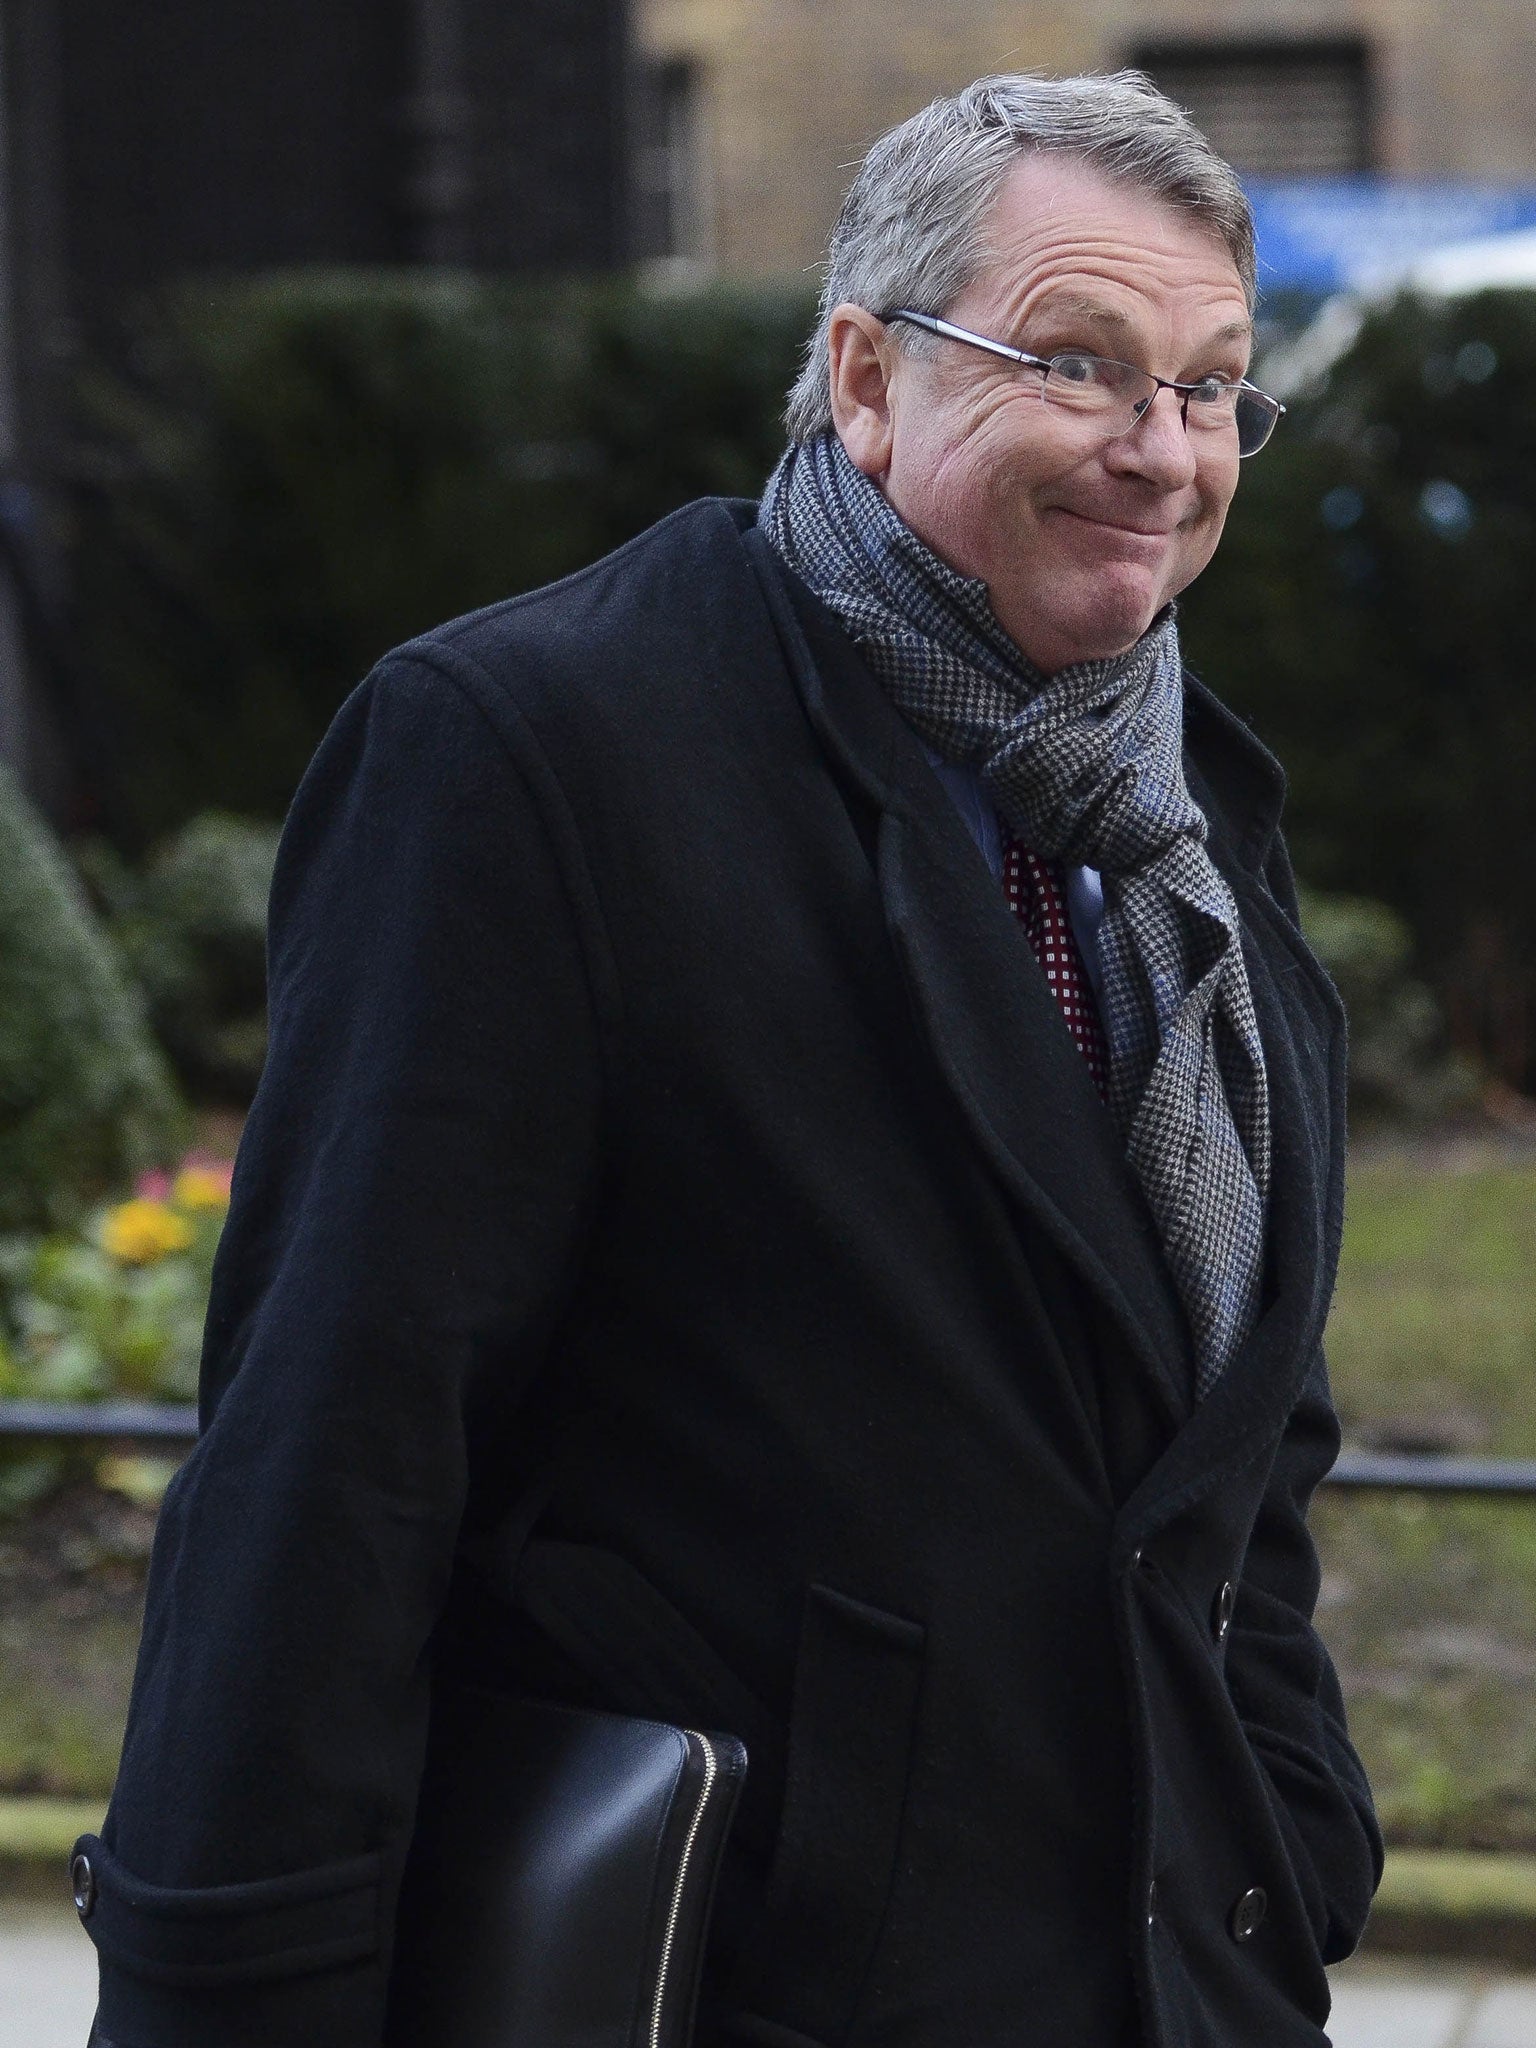 Lynton Crosby, the Tories’ election strategist, who hired Mr Curley